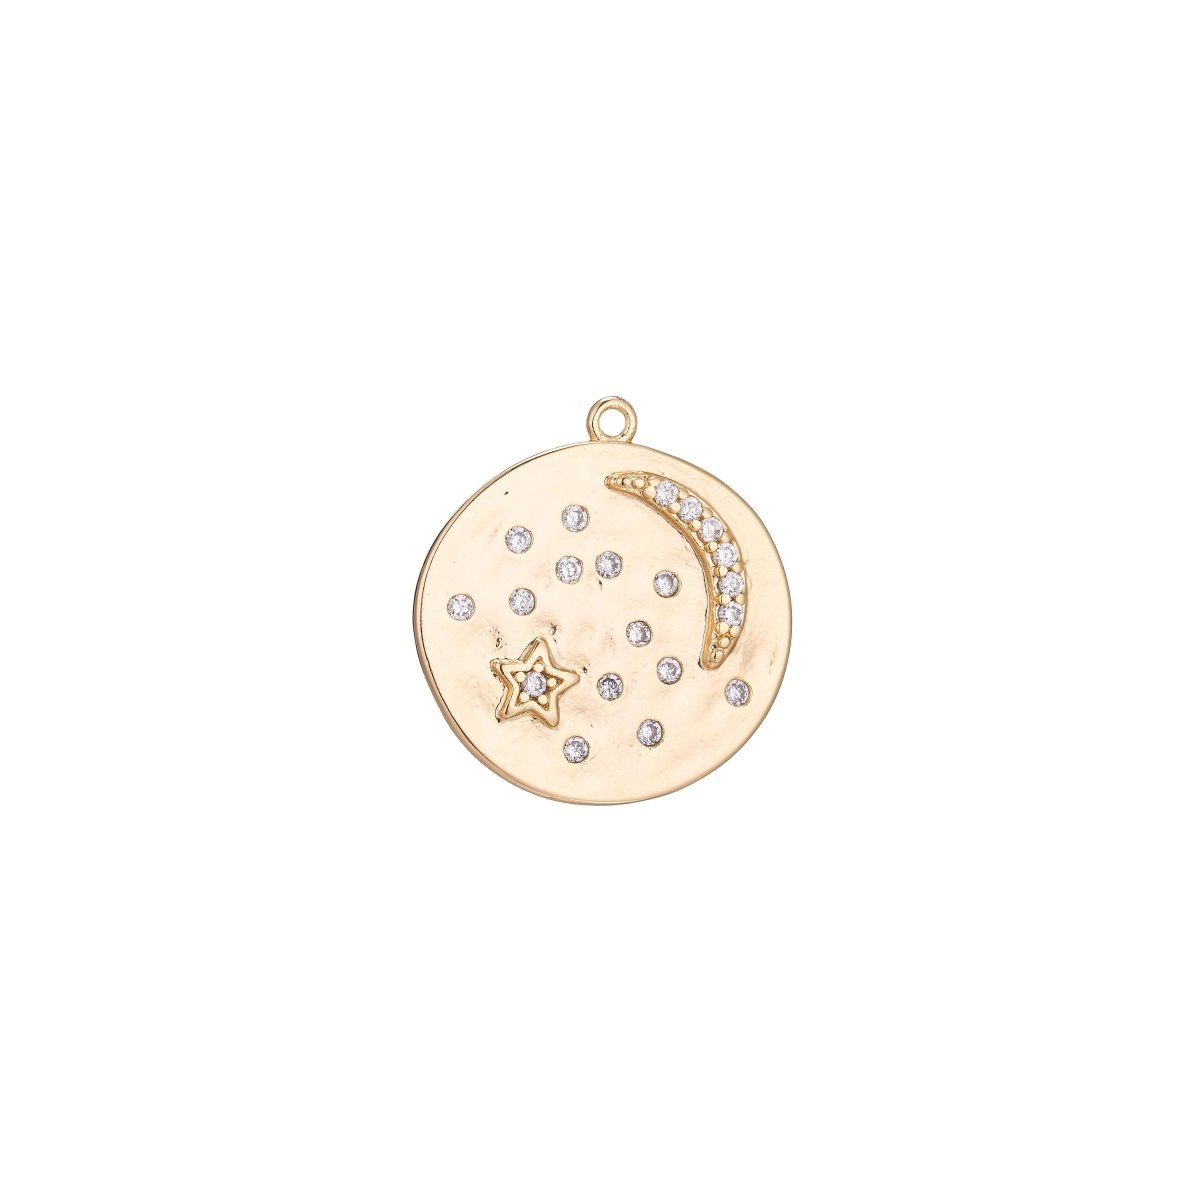 Love you to the moon and back charm Starry Night Coin Pendant, Moon and Stars Charm CZ in 18k Gold filled for Jewelry making SupplyC-341 - DLUXCA